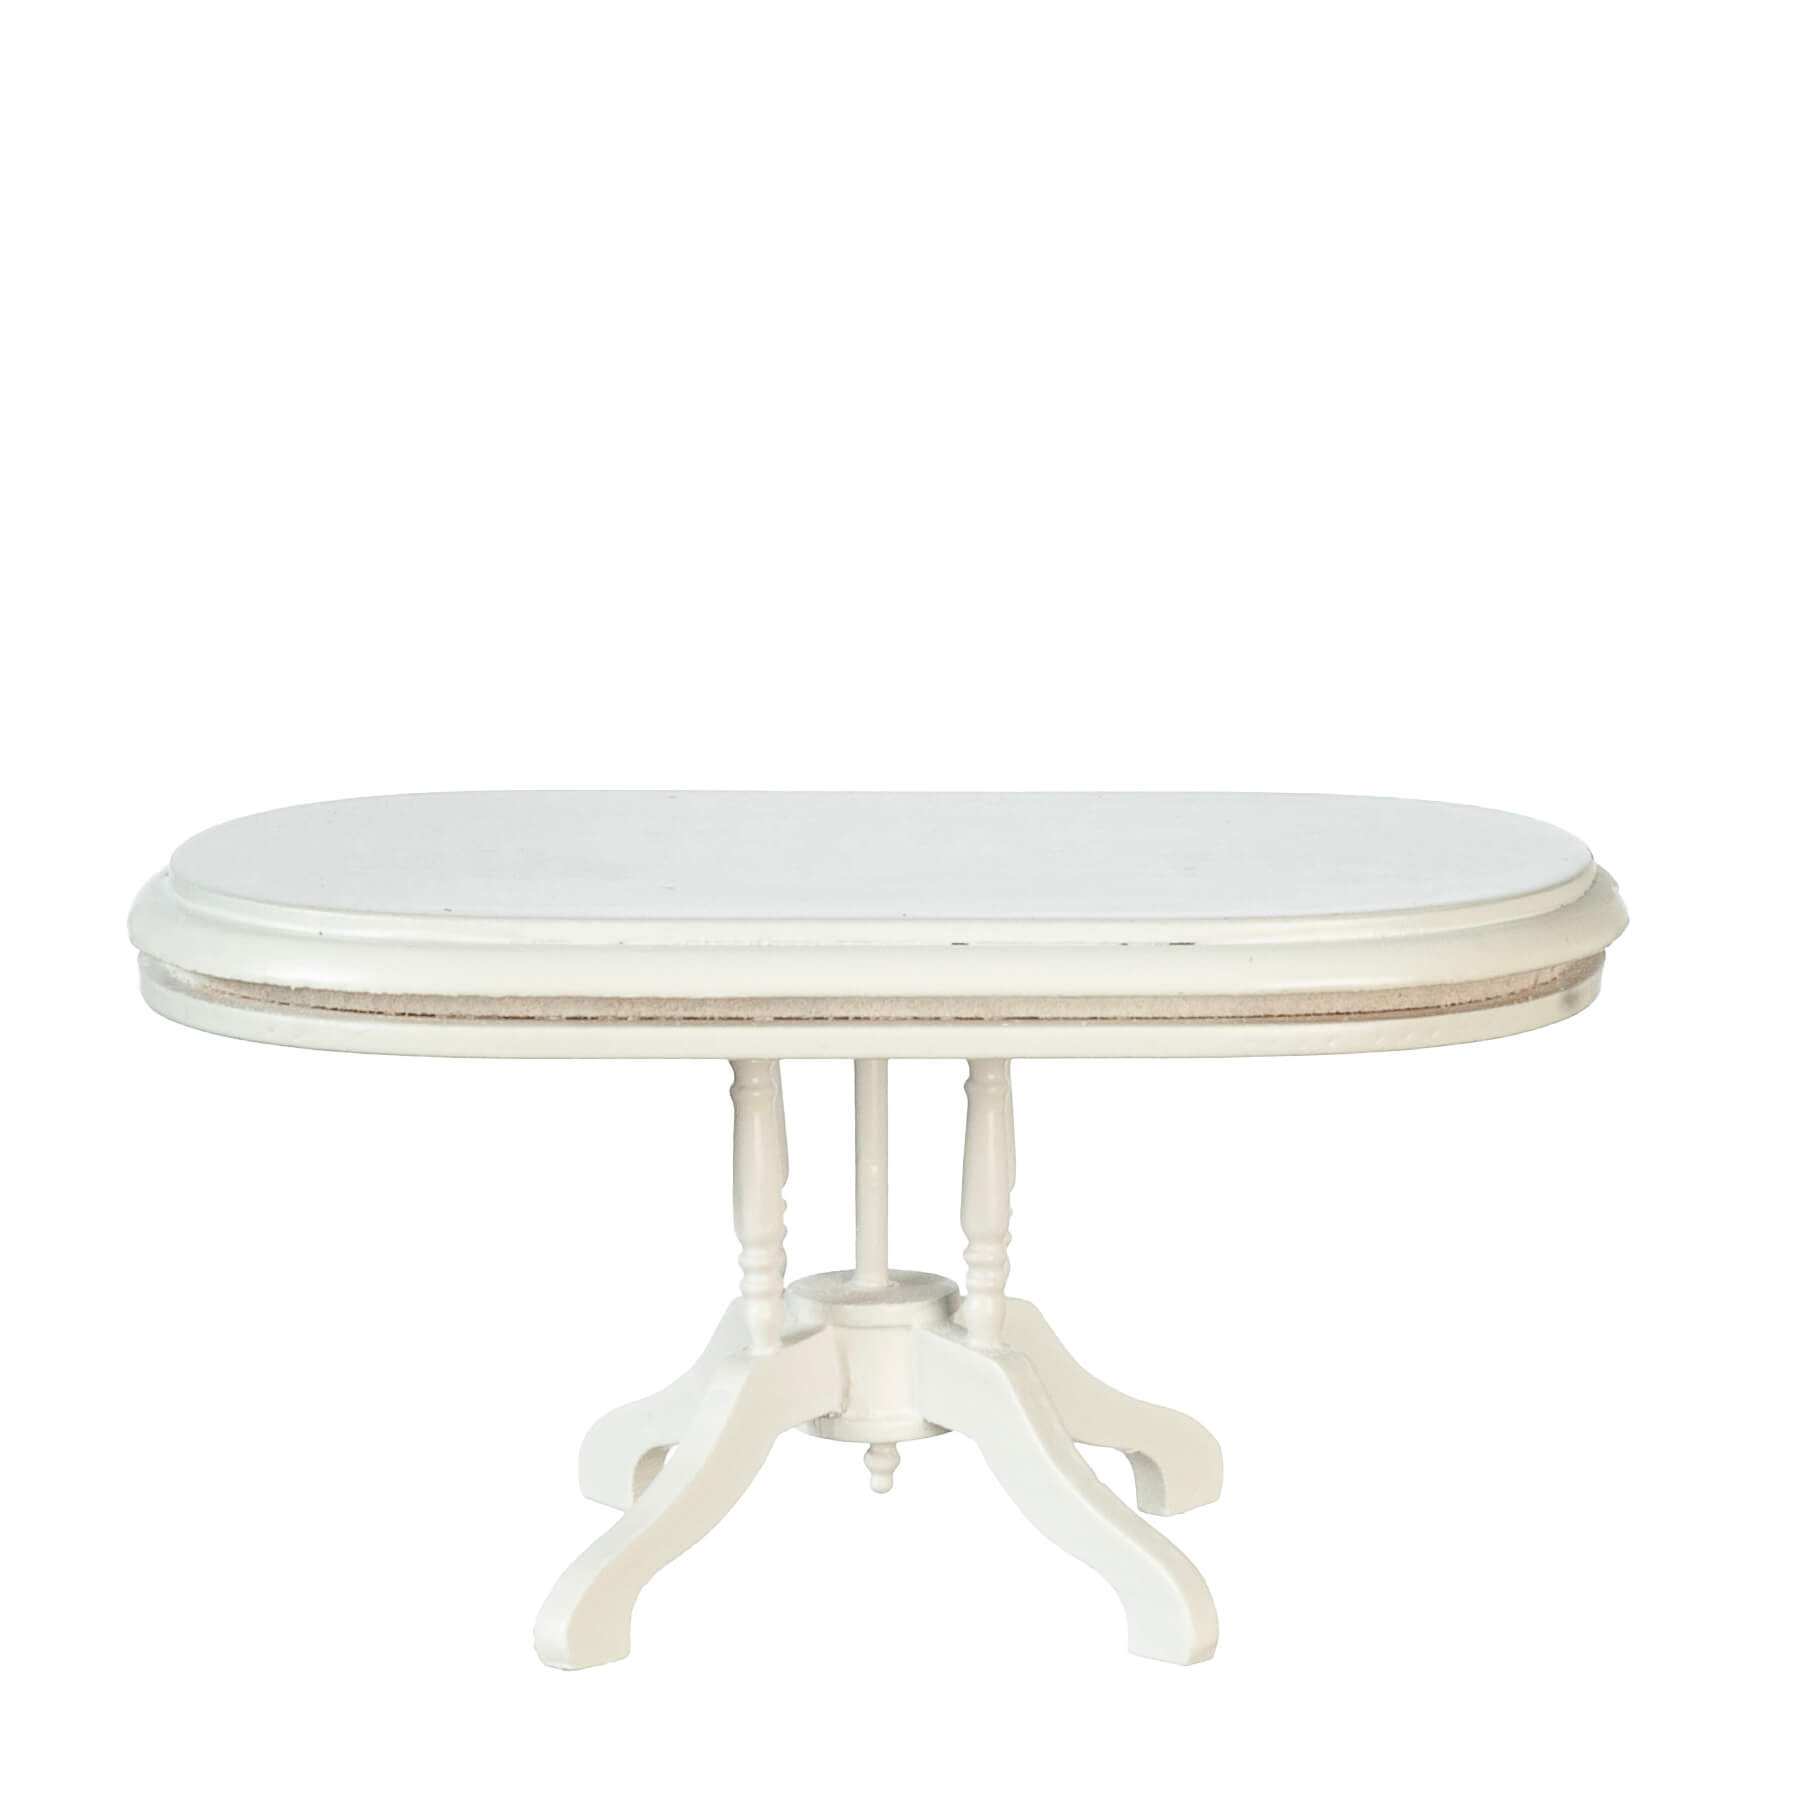 Oval Dining Room Table - White